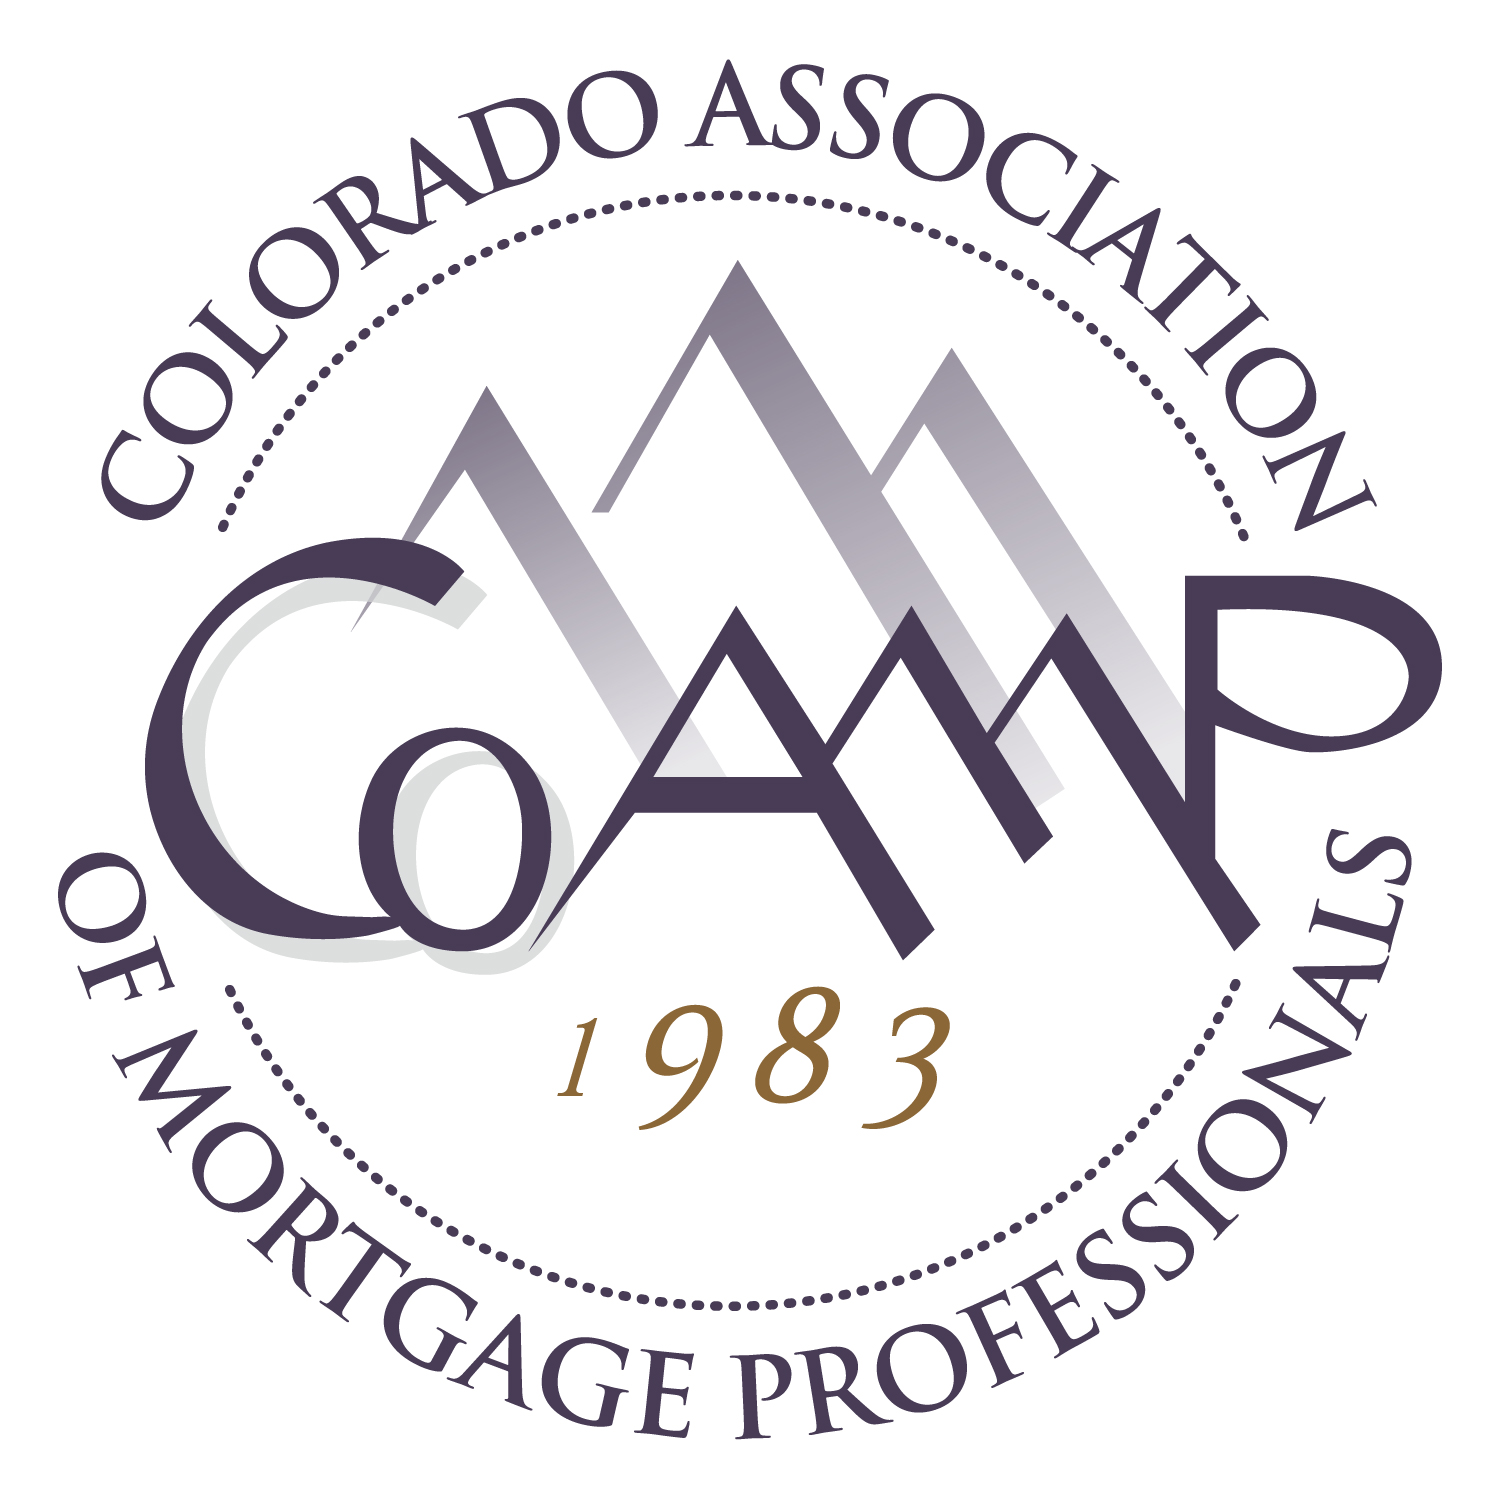 Kay Cleland is the Owner of KC Mortgage LLC in Castle Rock, Colo., and President of the Colorado Association of Mortgage Professionals